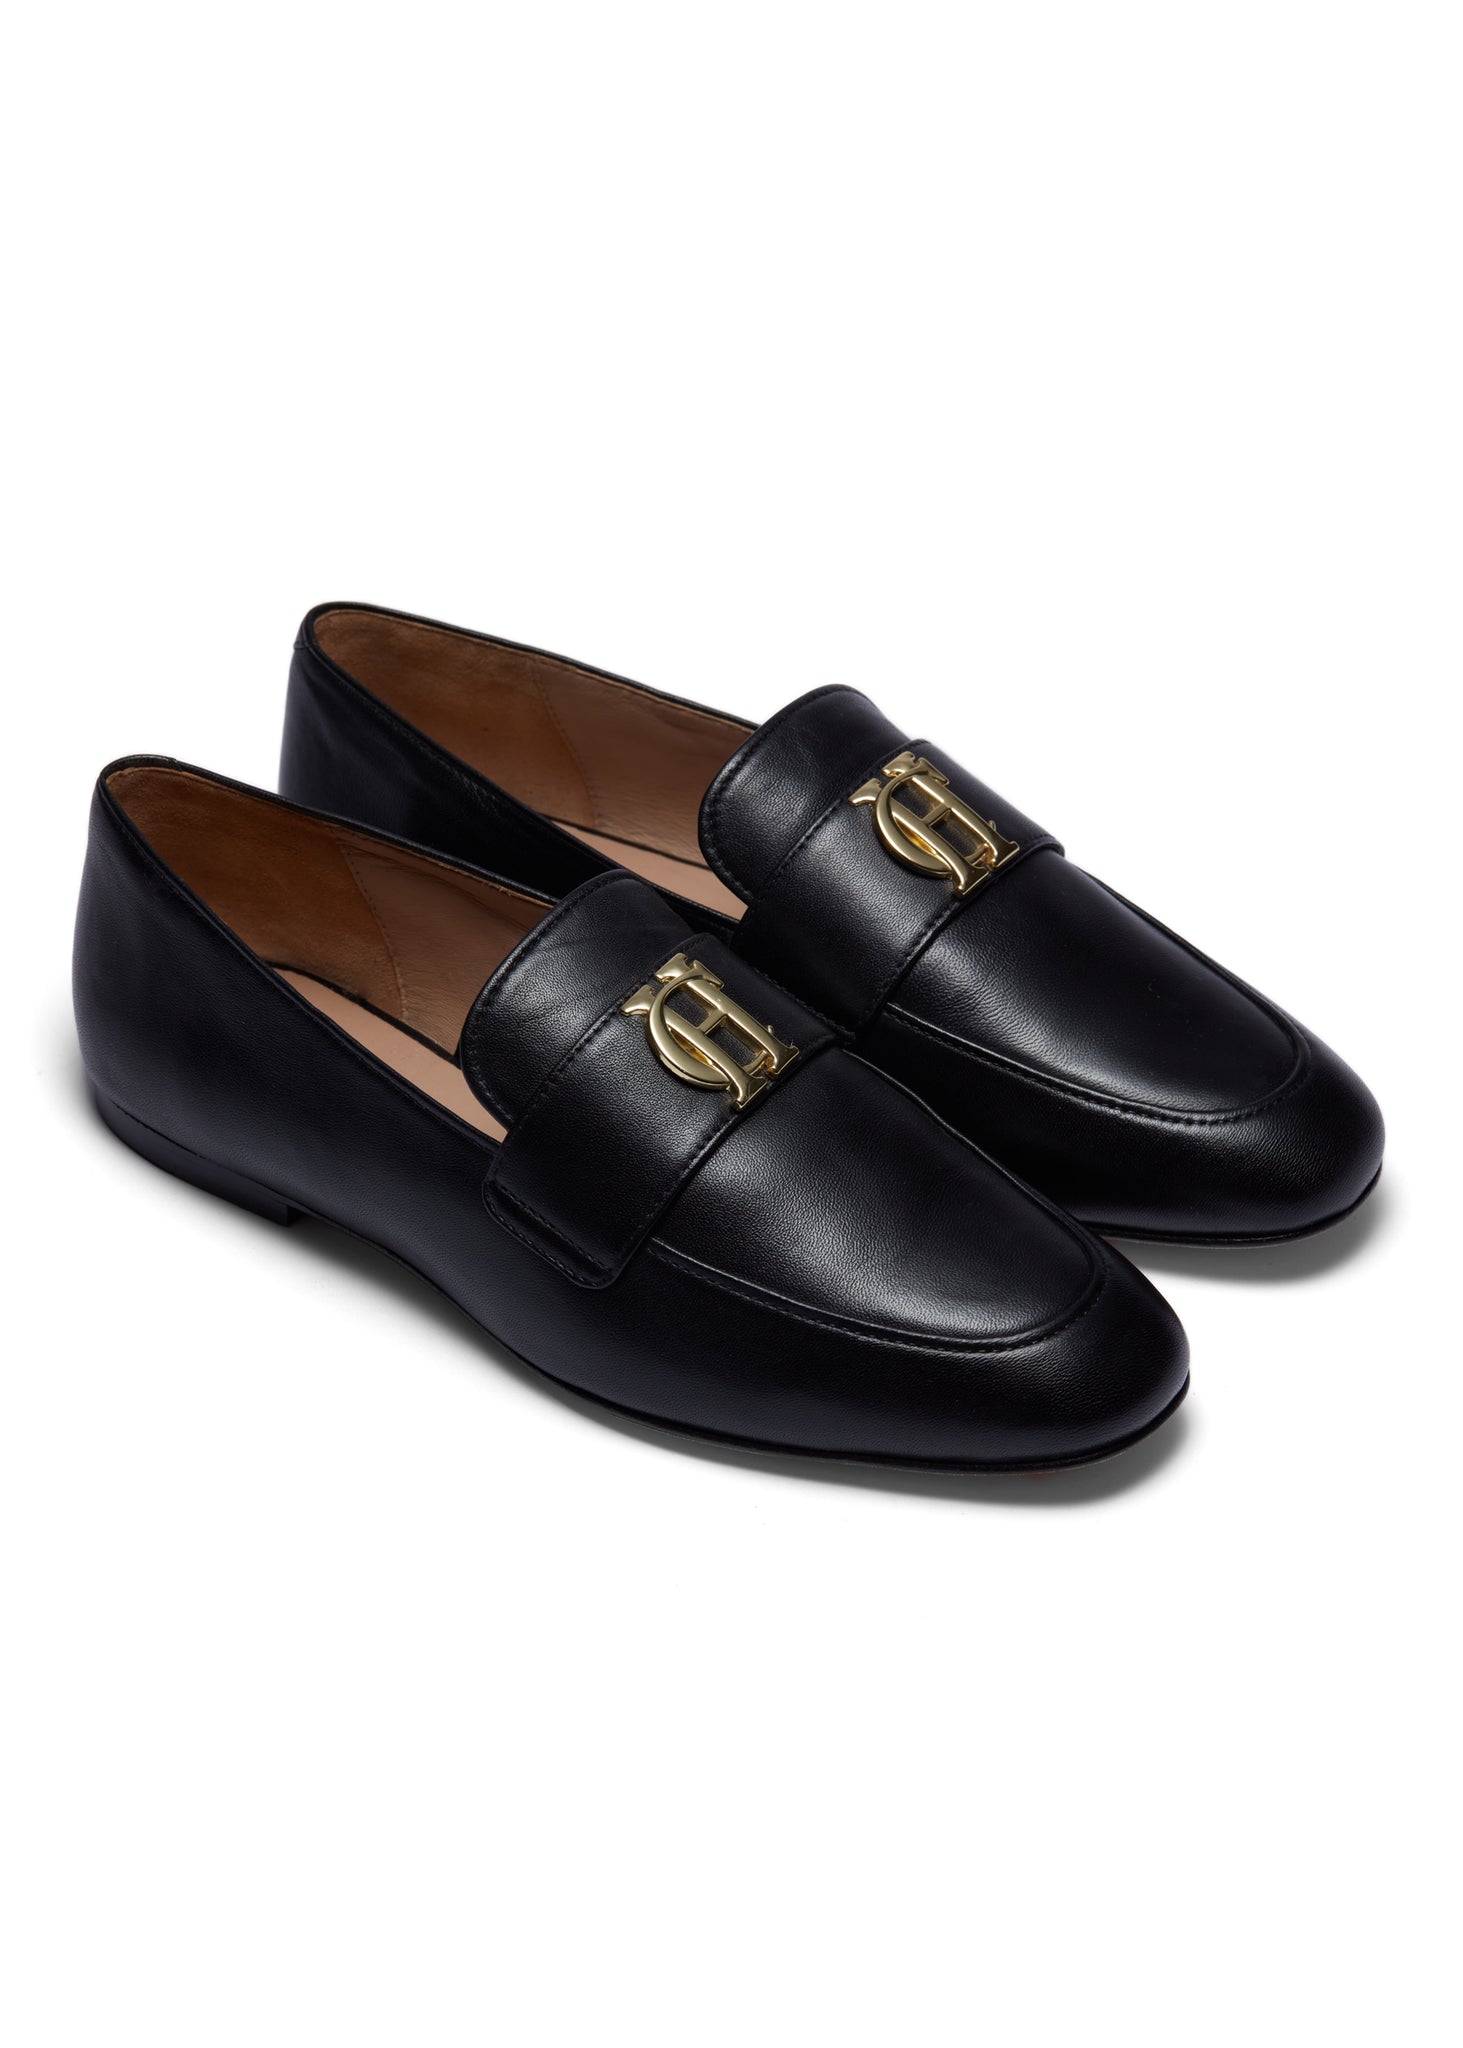 black leather loafers with a slightly pointed toe and gold hardware to the top